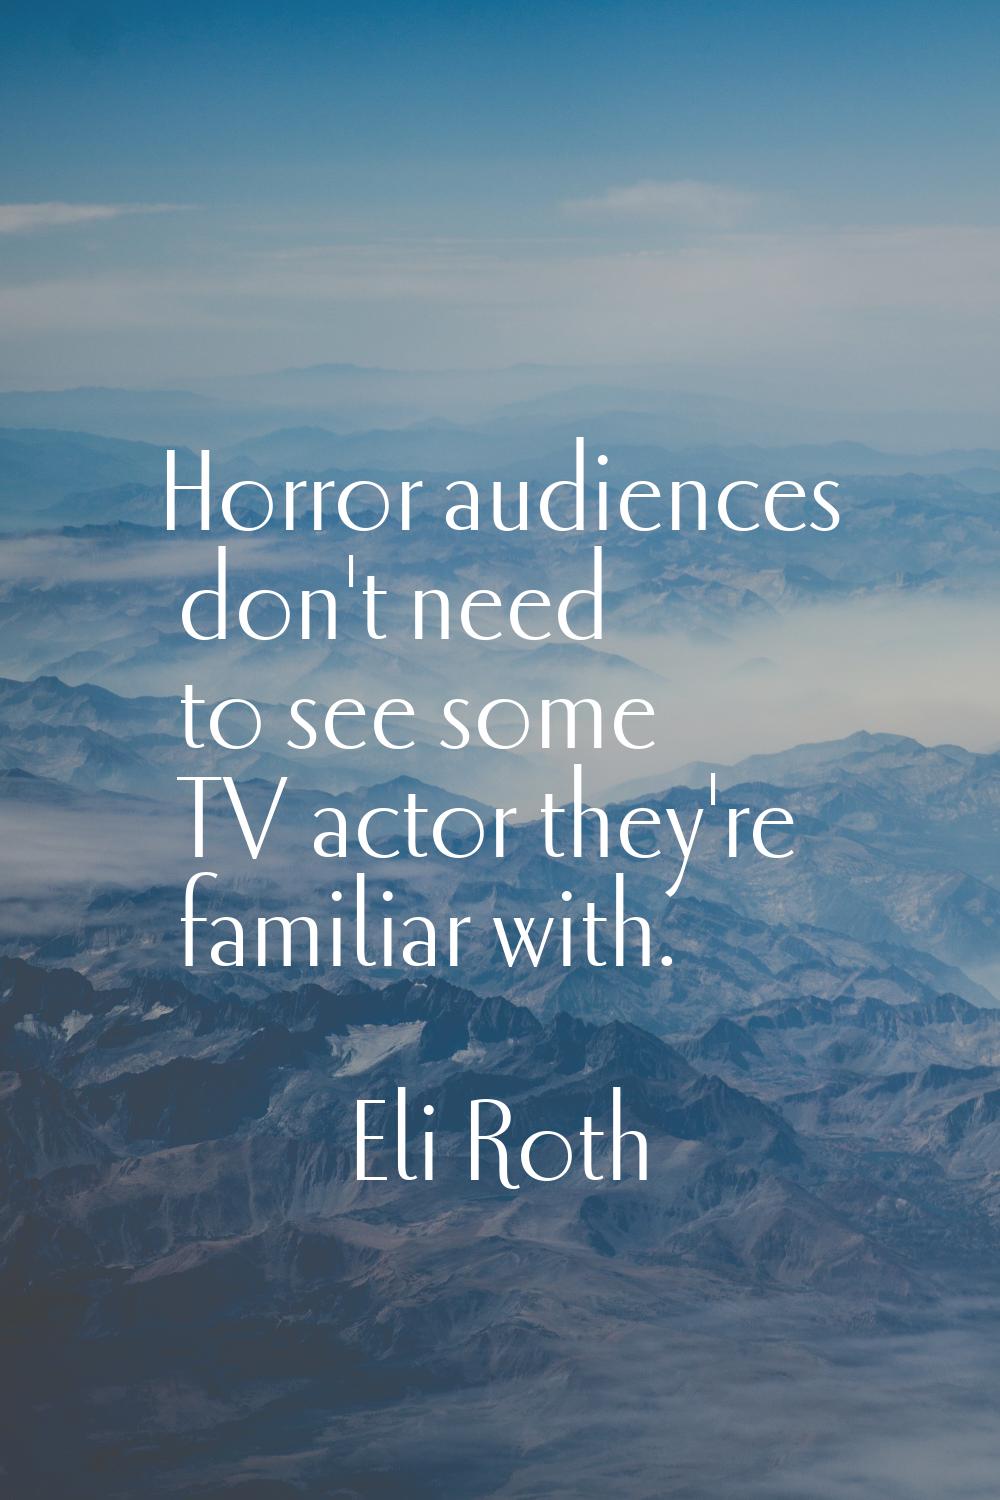 Horror audiences don't need to see some TV actor they're familiar with.